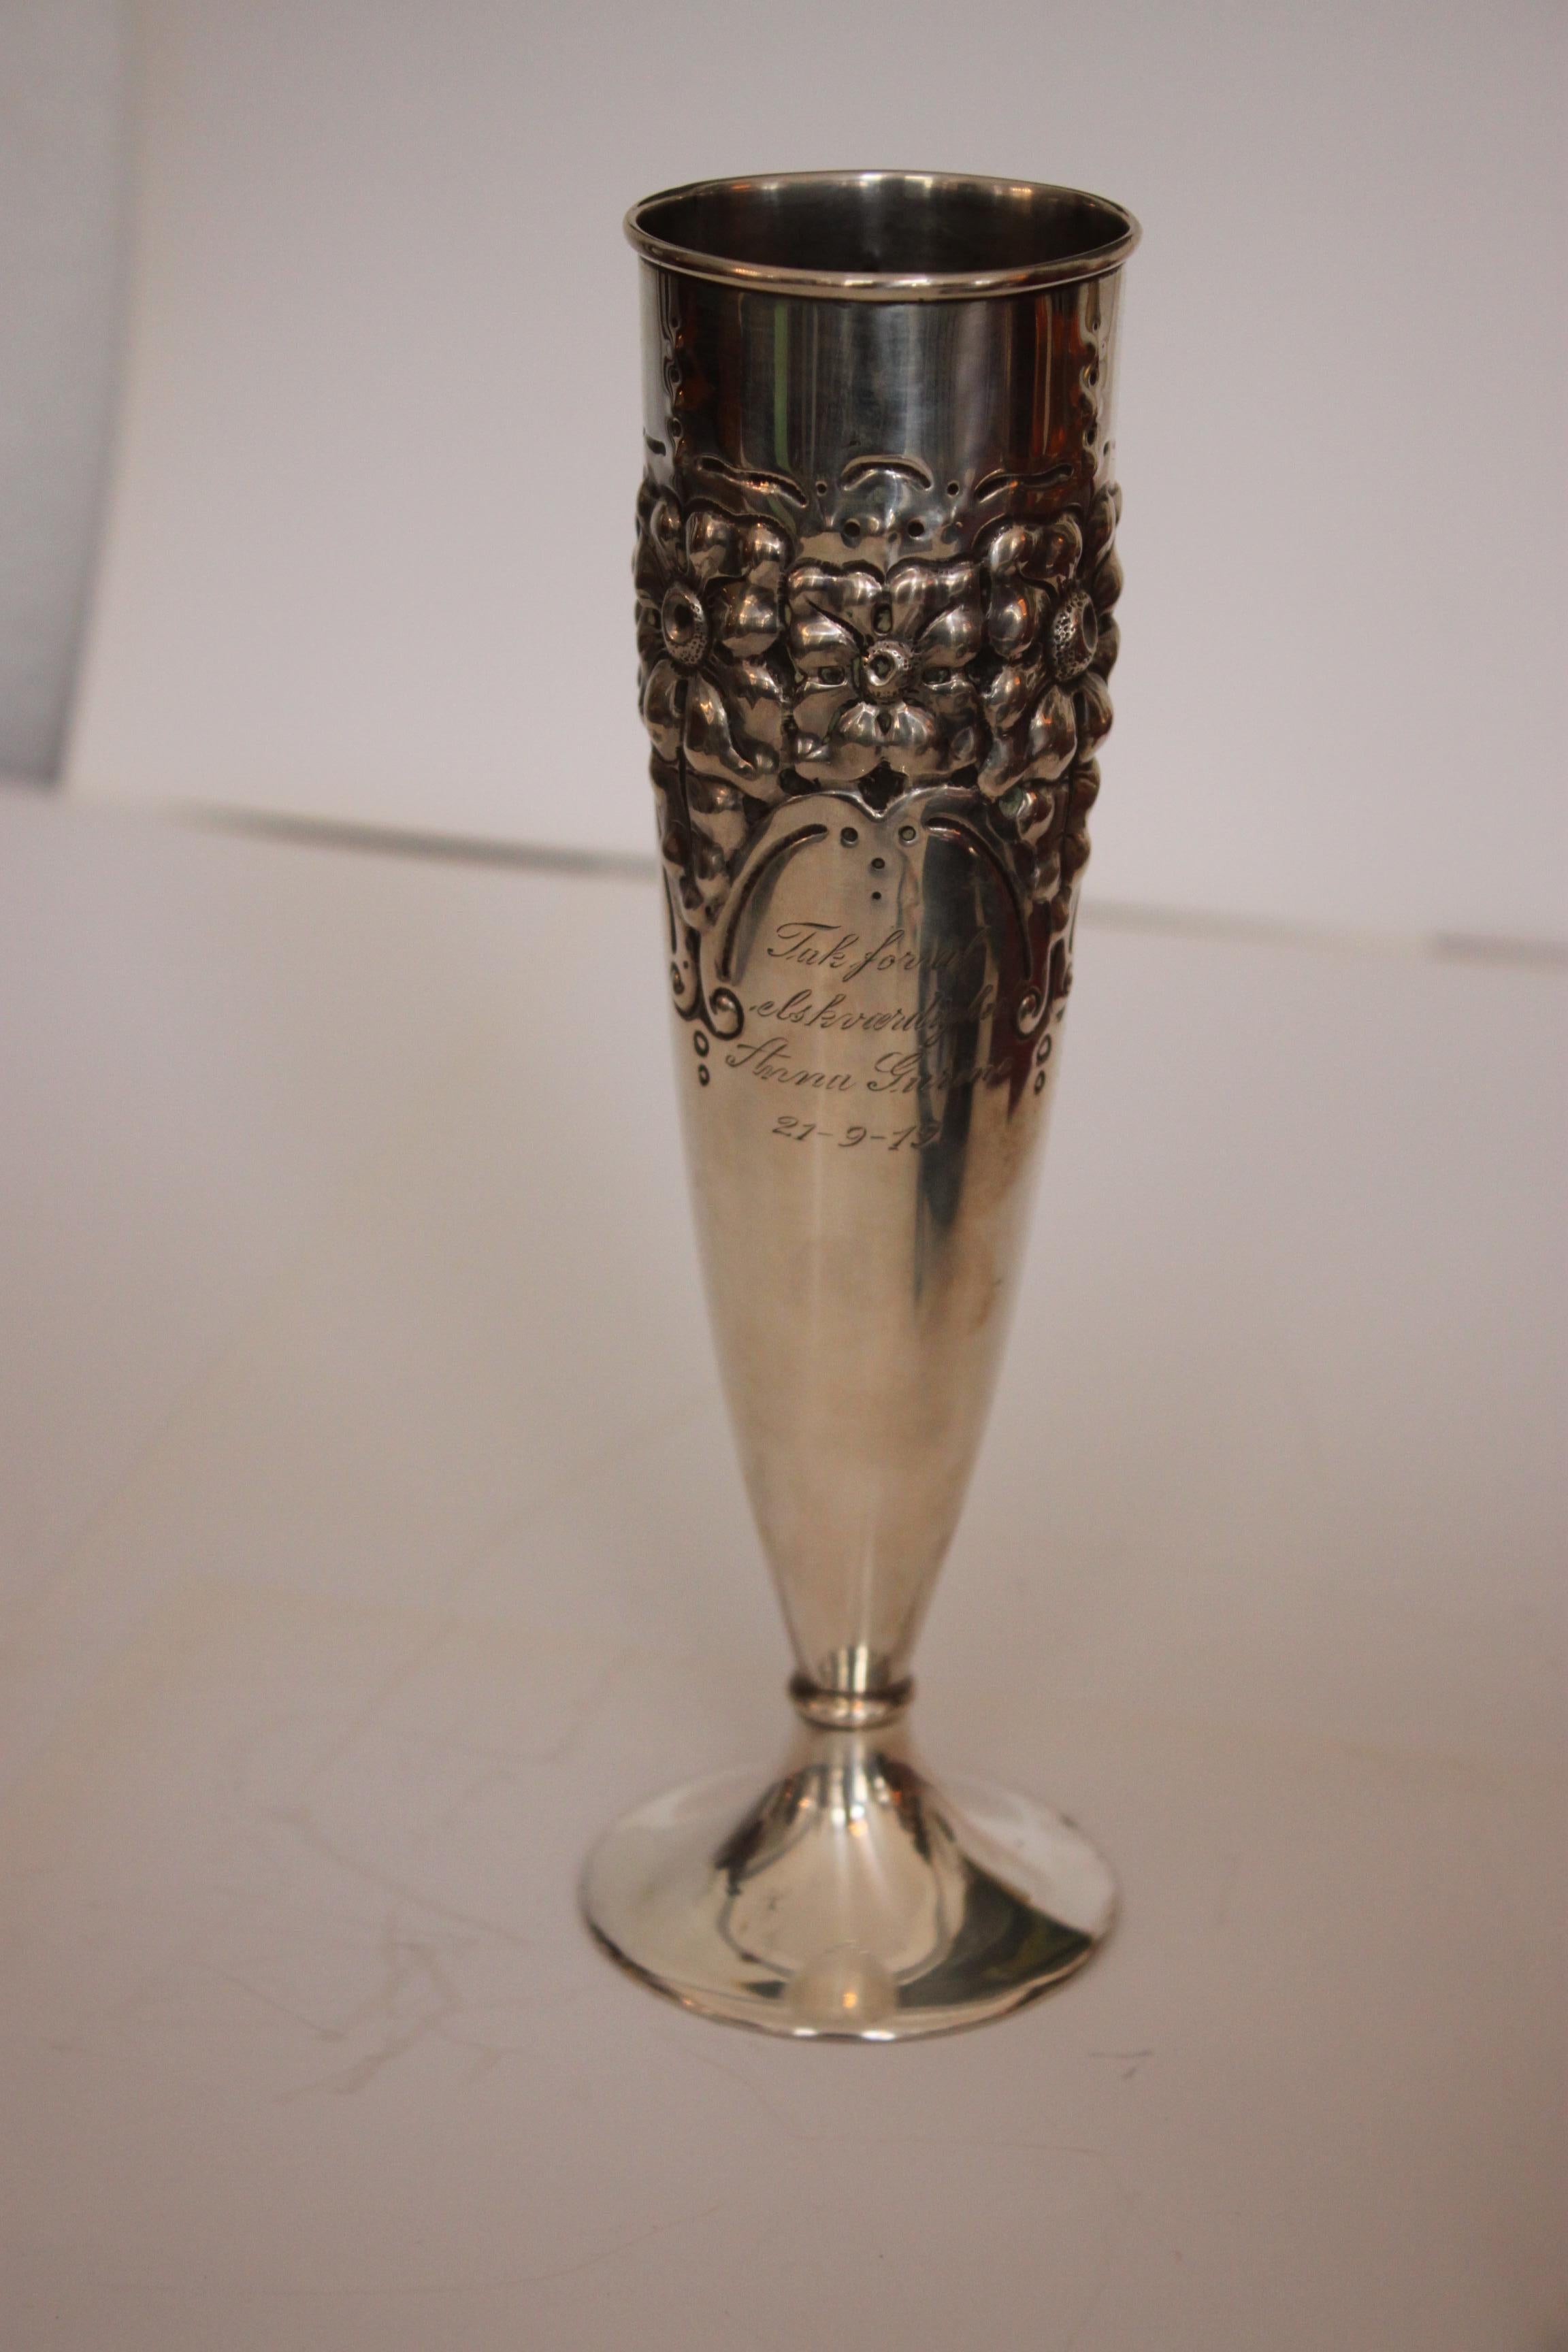 Early 20th century
a nice old trophy
silver
with engraving
hallmarked
weight: 120 gr.
 